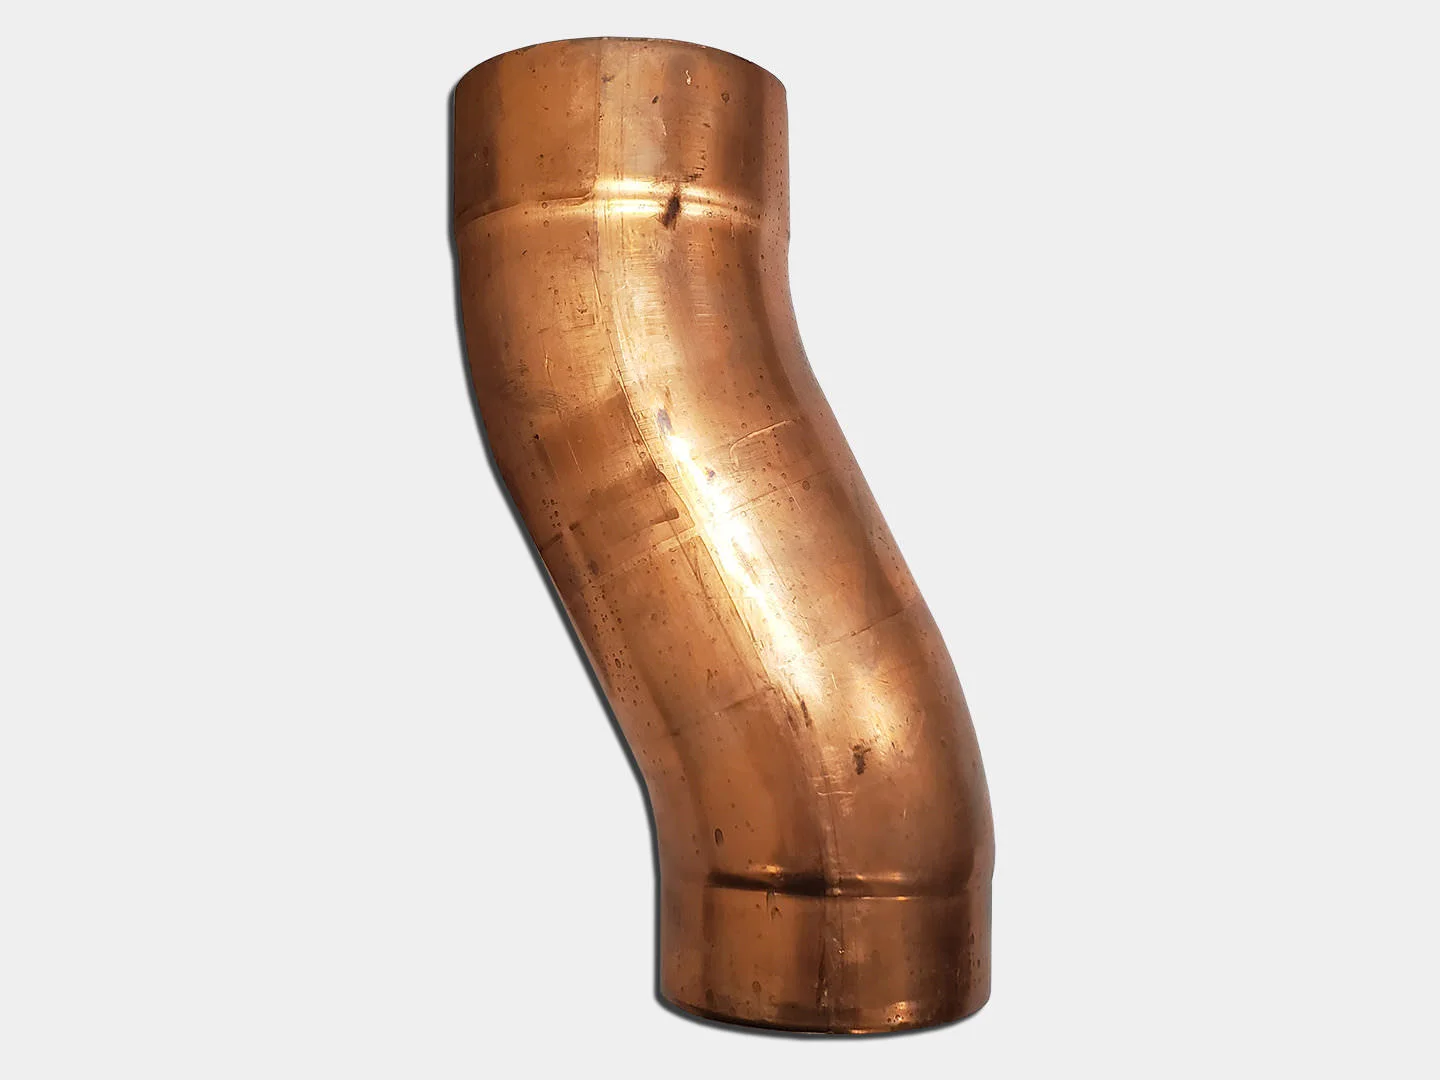 Plain round Z / Zigzag seamless elbow for copper downspout